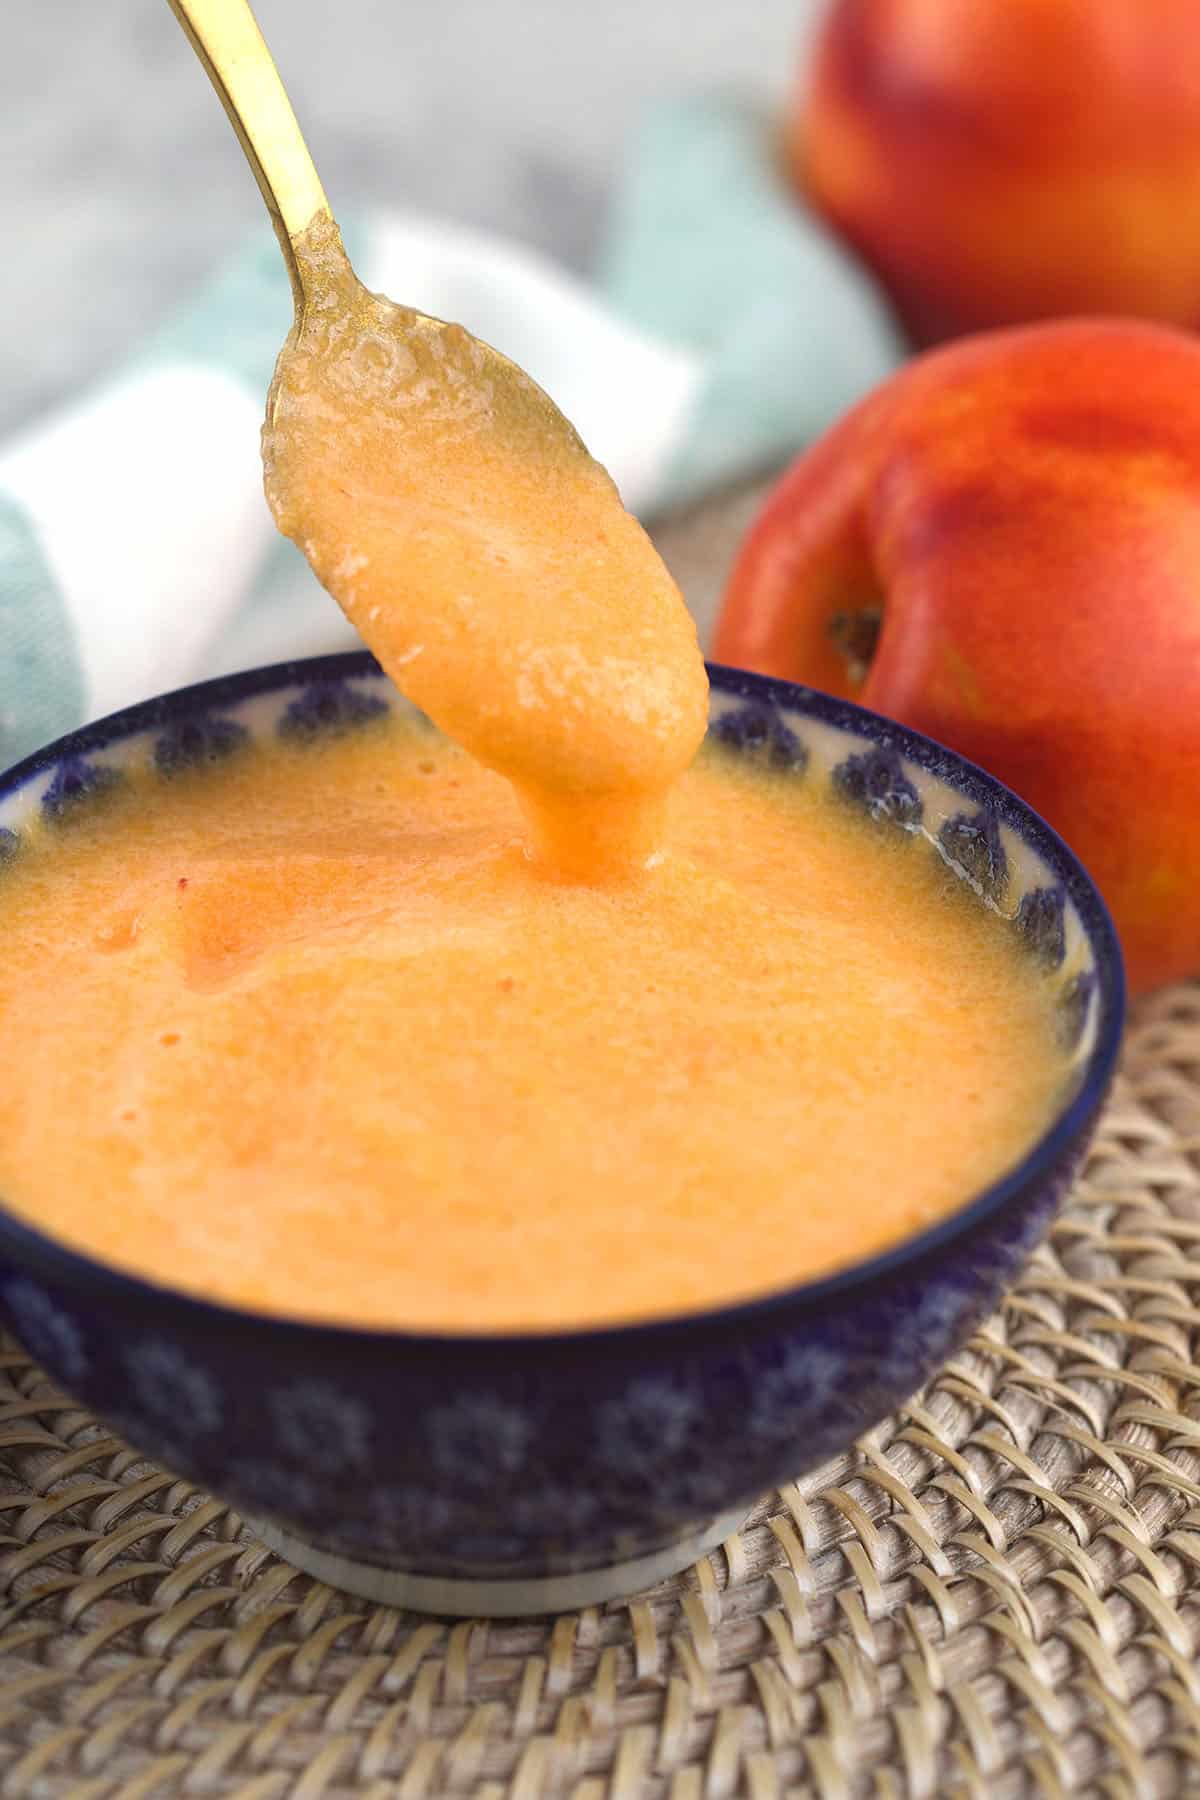 A spoon is being lifted from a small bowl filled with peach puree.